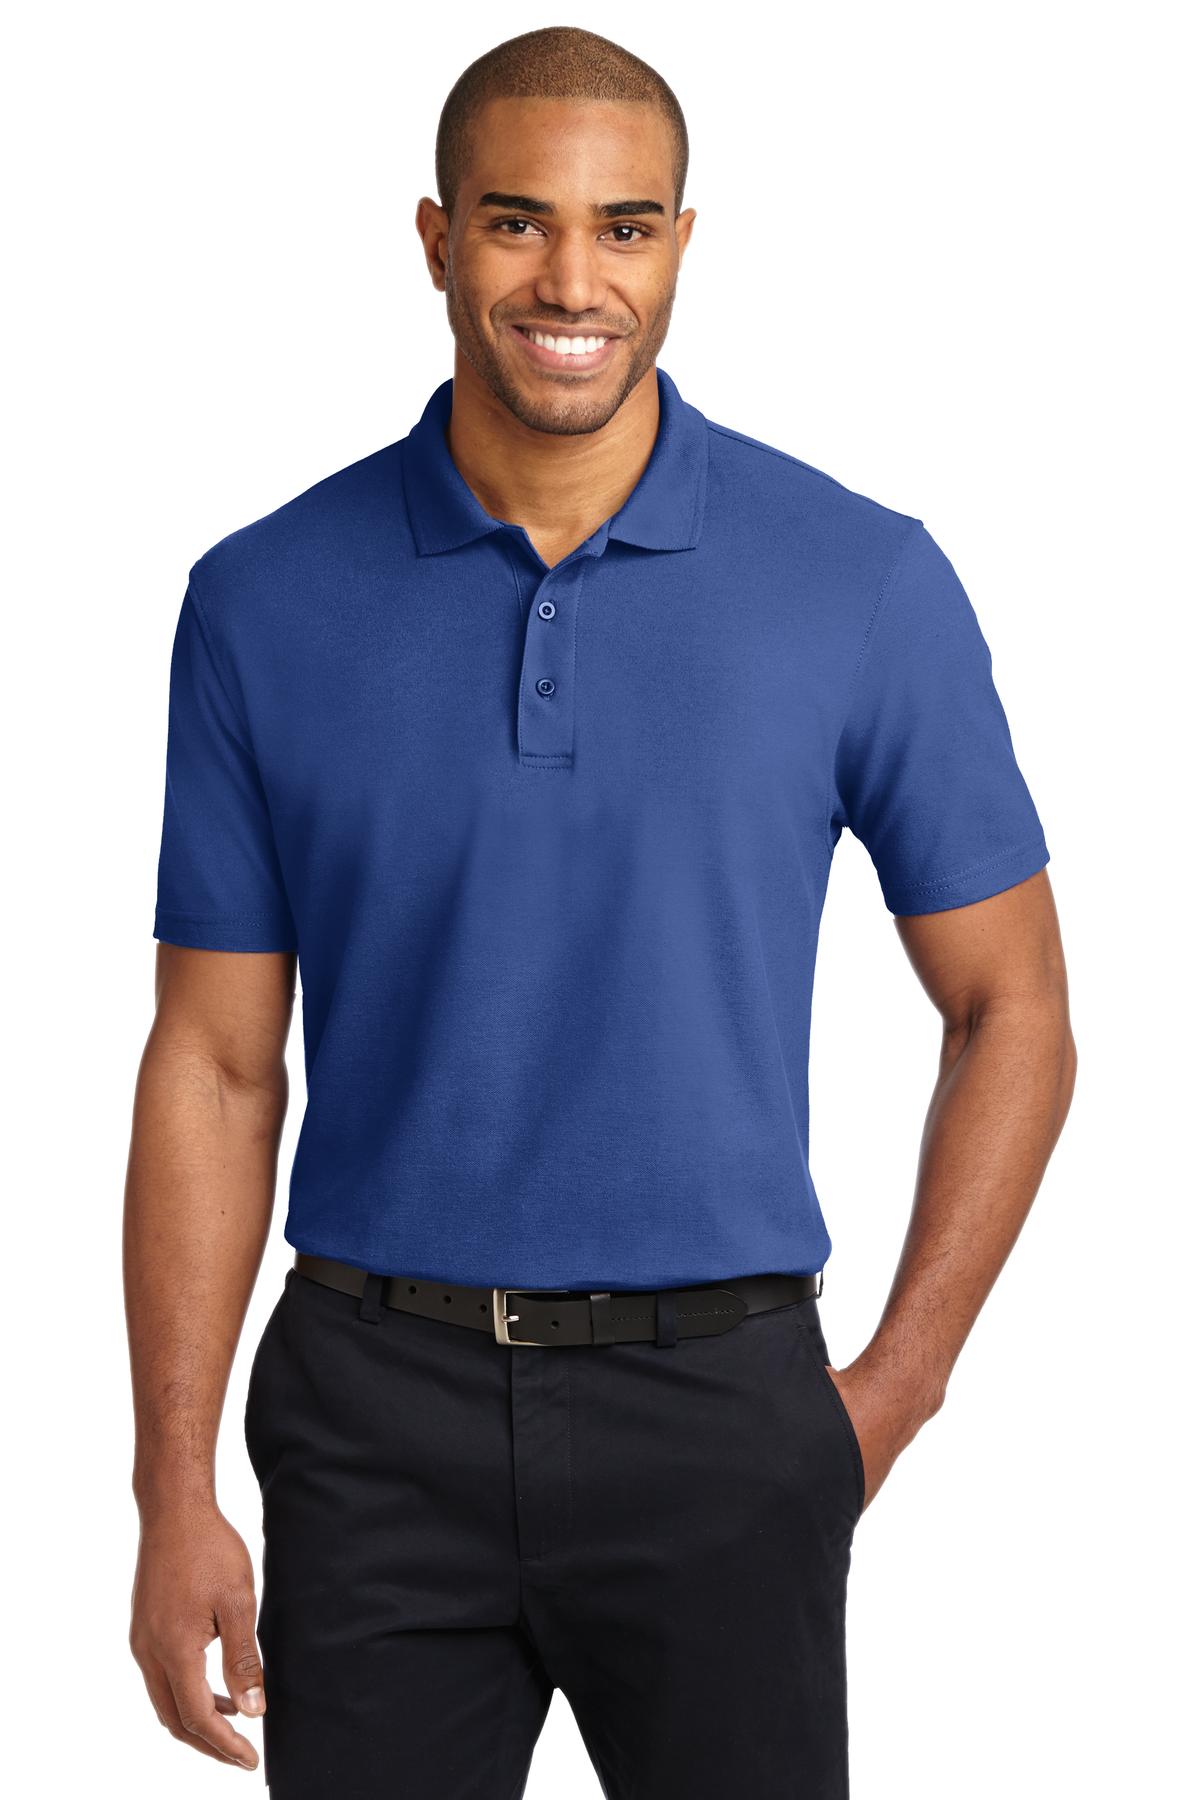 Port Authority¬Æ Tall Stain-Release Polo. TLK510